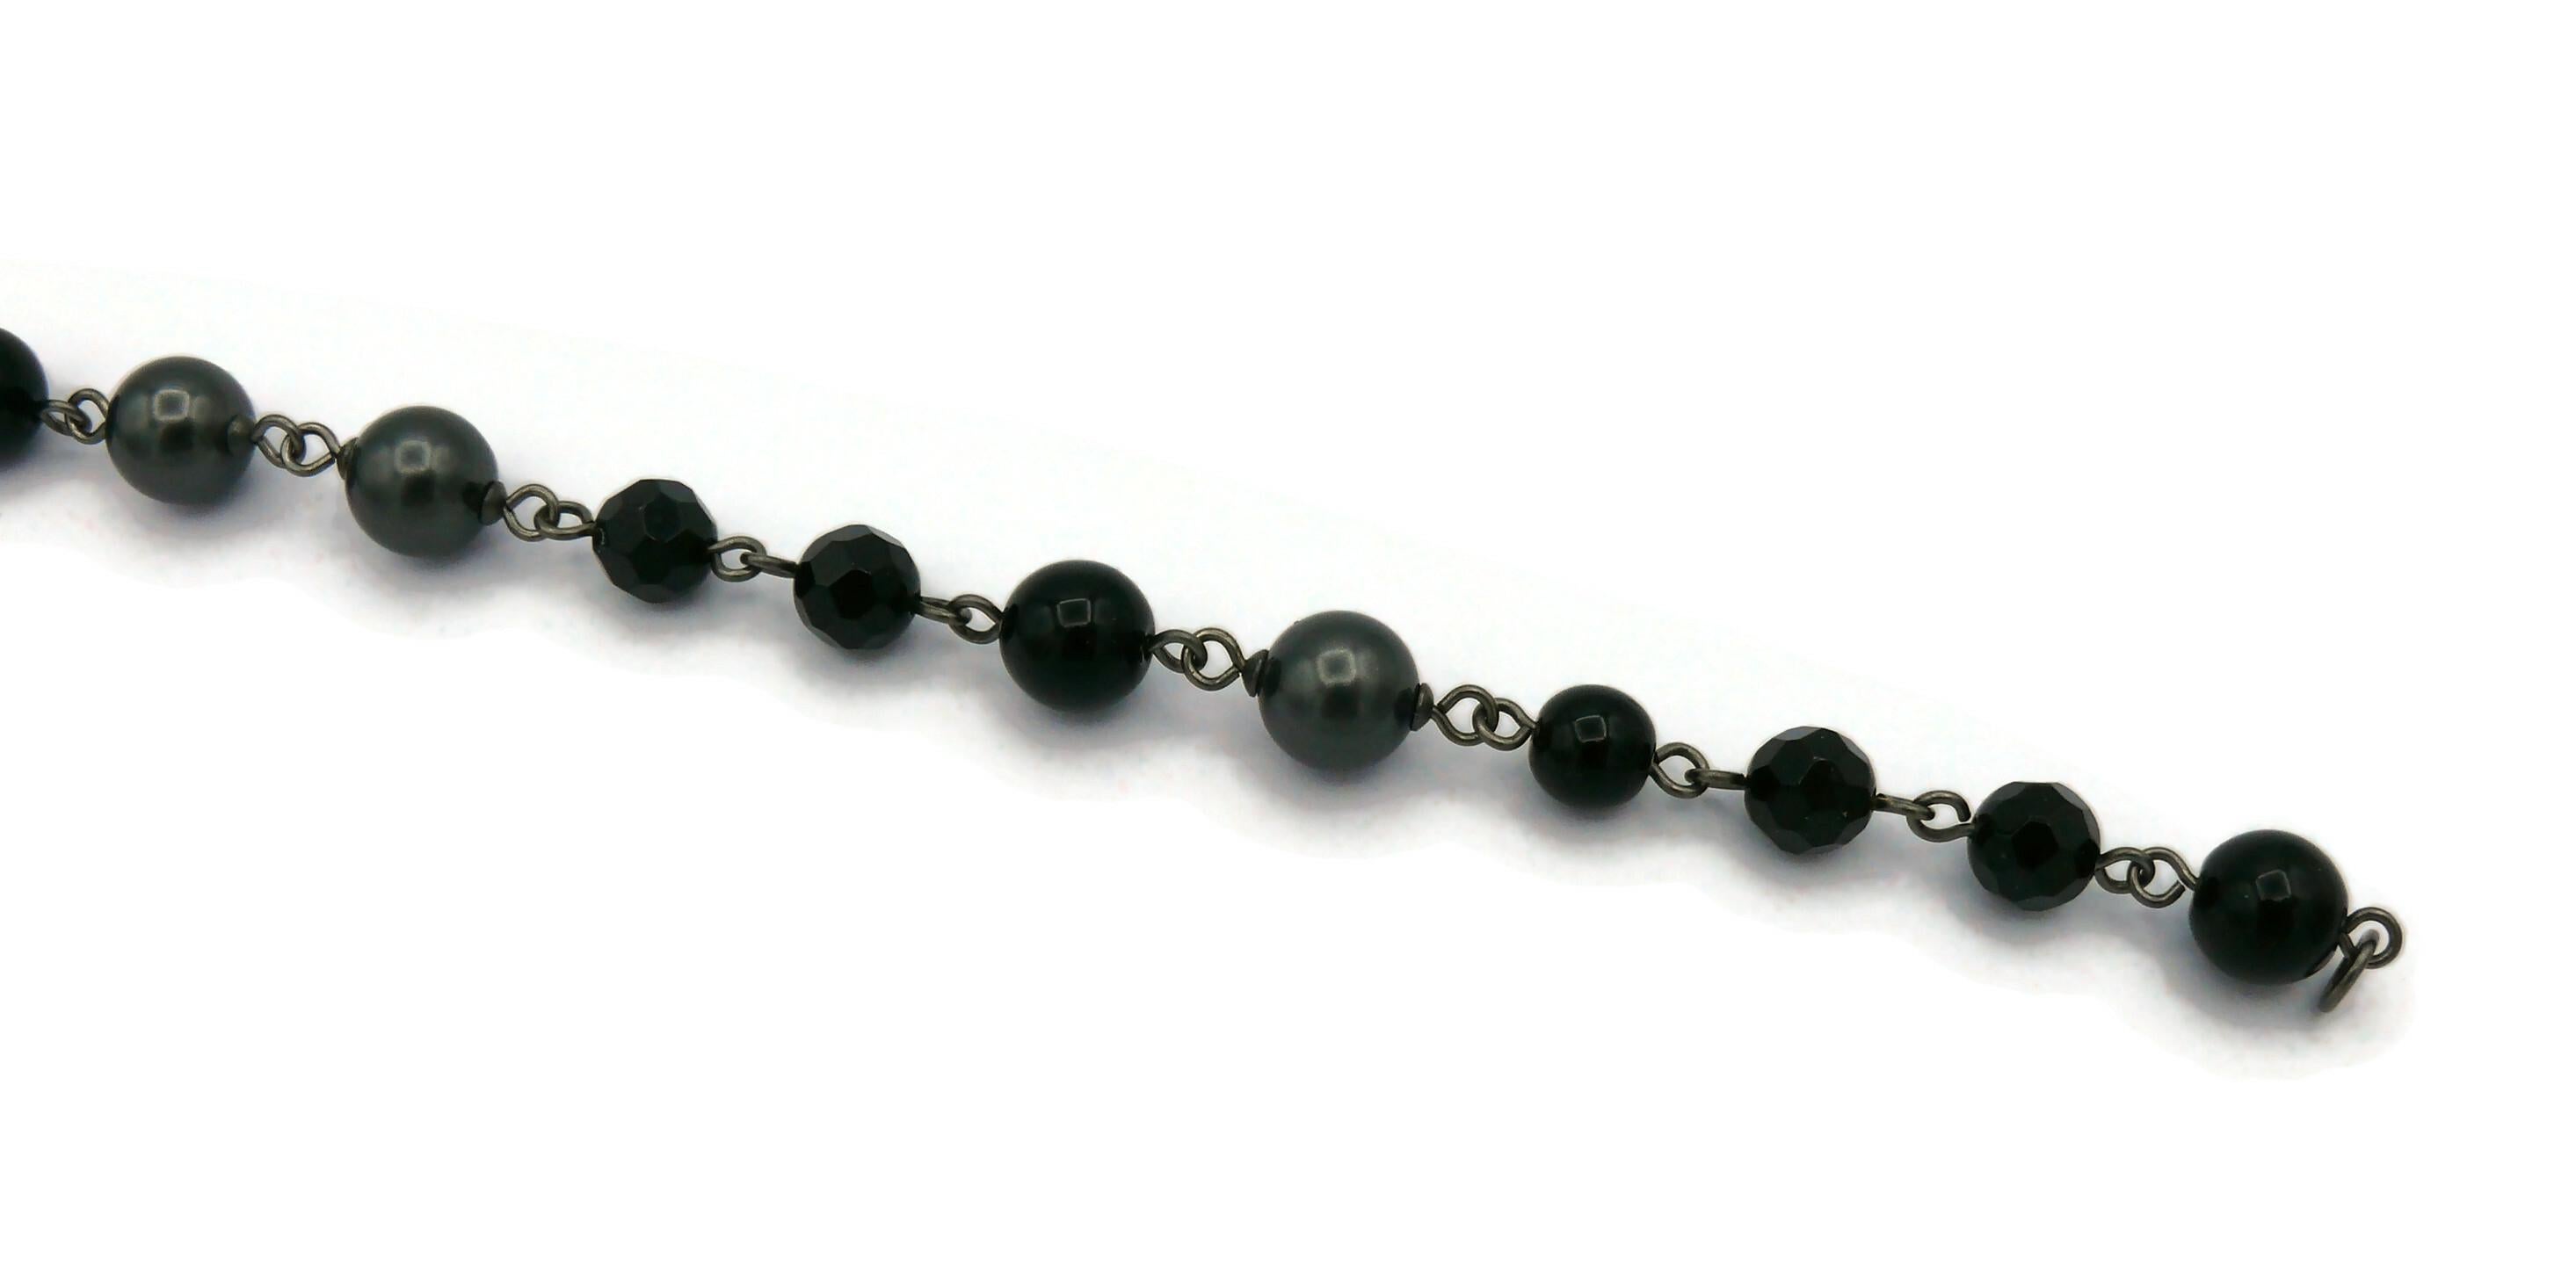 CHANEL by KARL LAGERFELD 2010 Grey Pearl and Black Bead CC Necklace For Sale 8